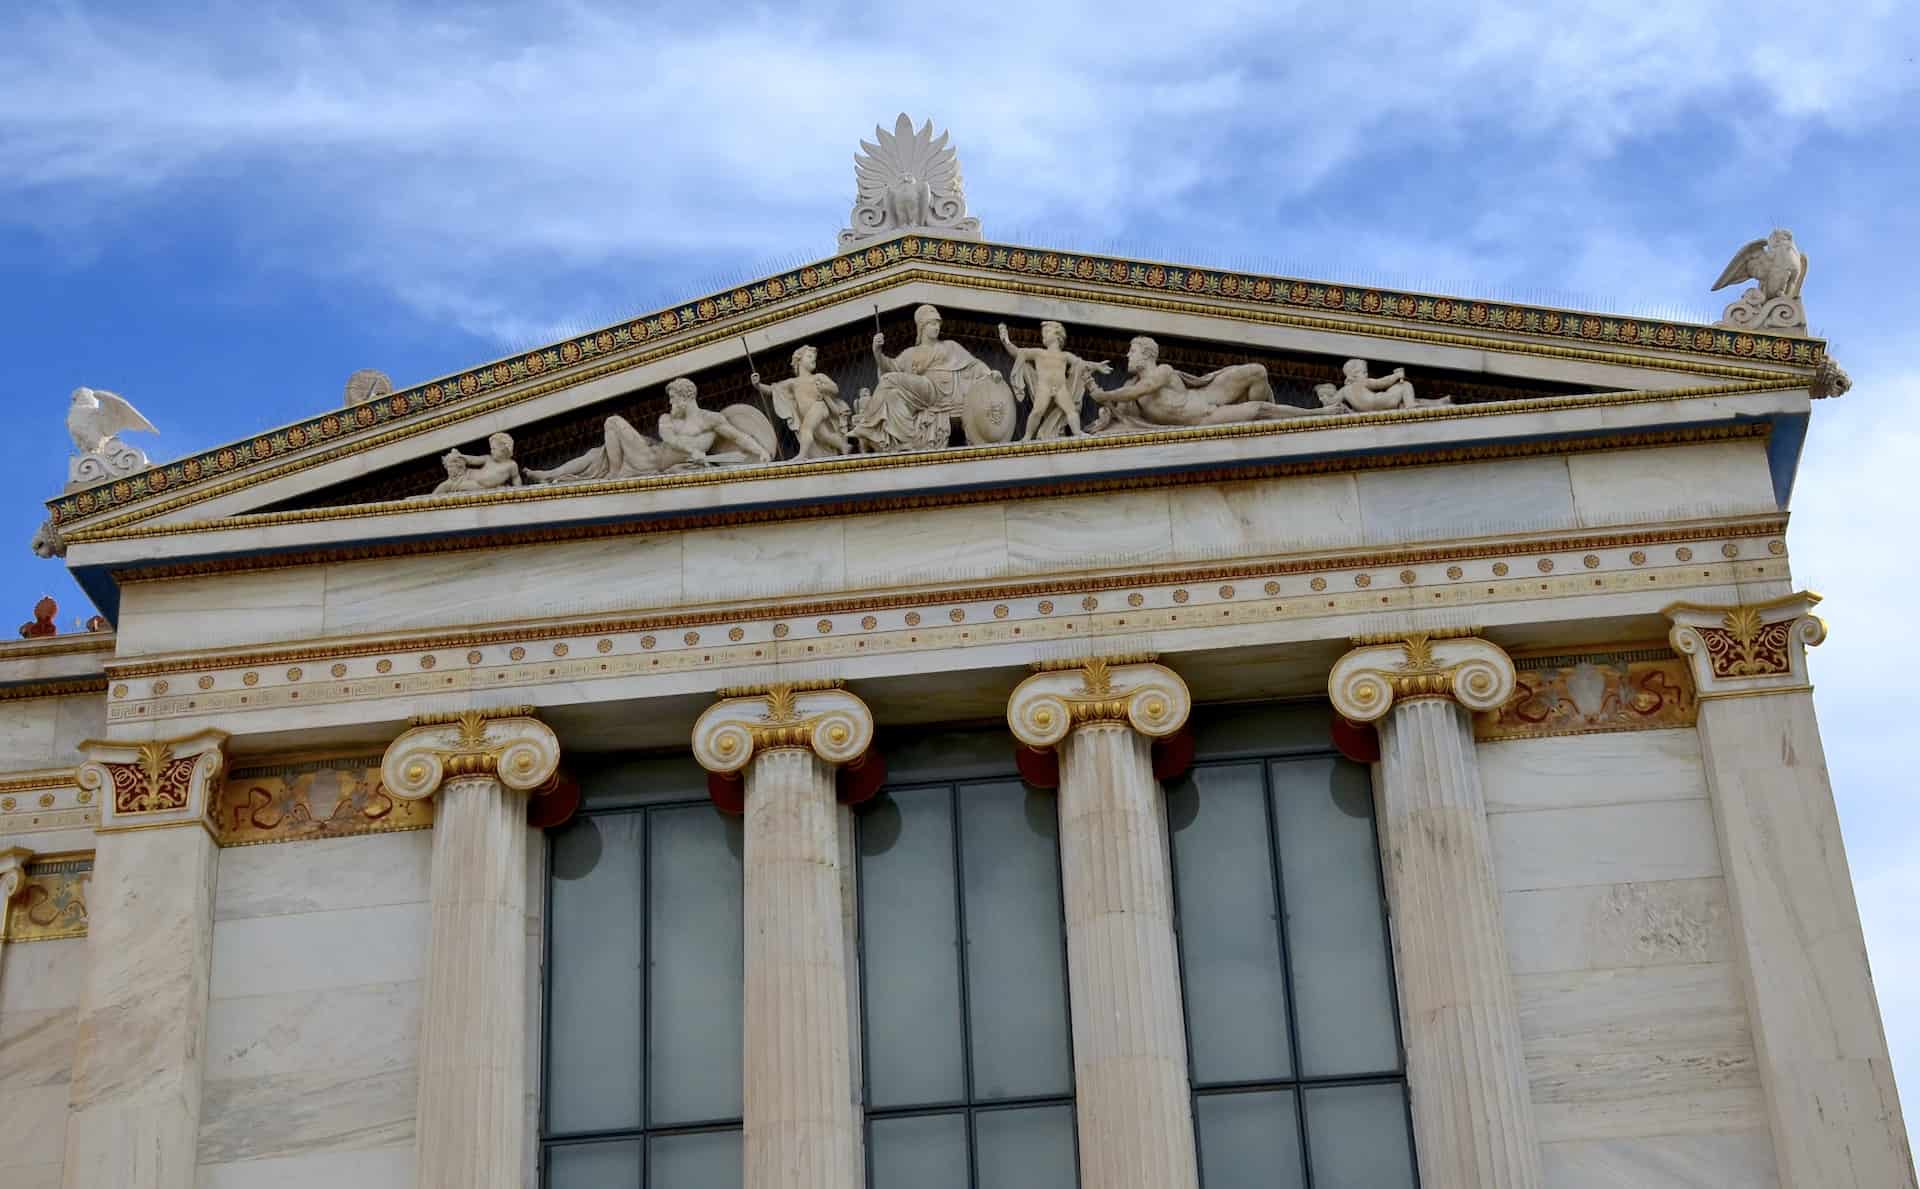 Northwest pediment of the north wing of the Academy of Athens